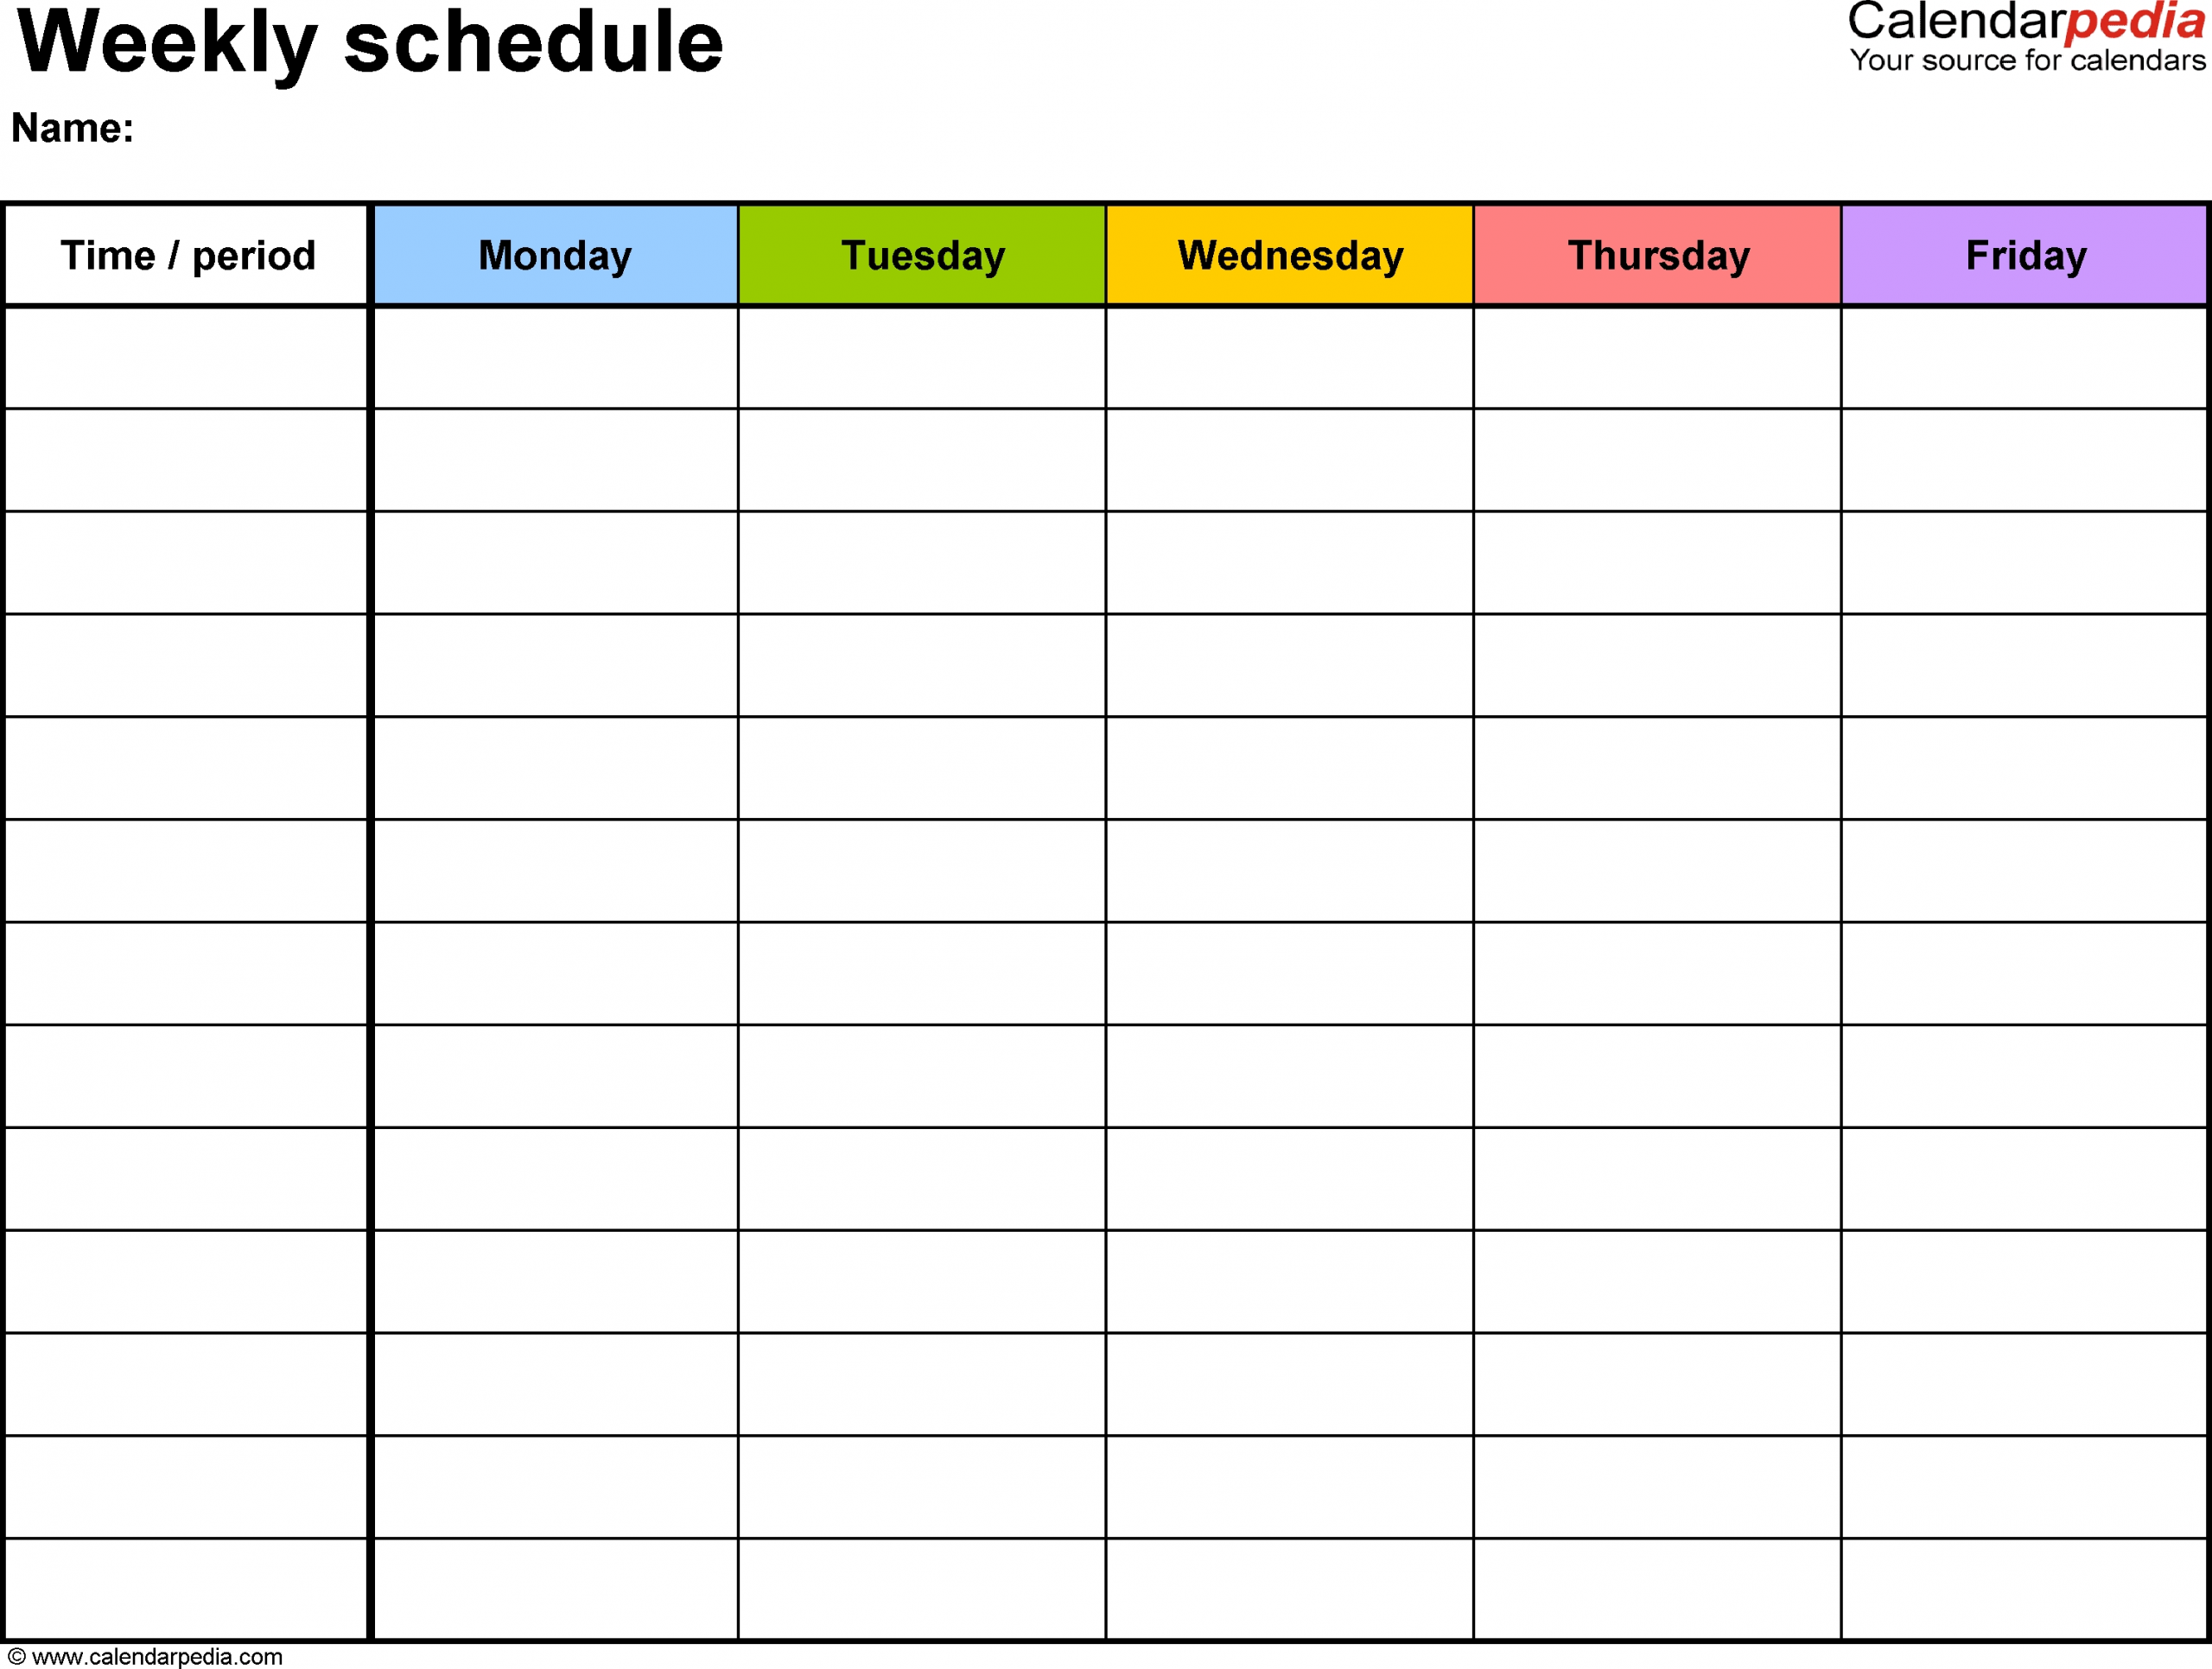 Free Weekly Schedule Templates For Excel - 18 Templates regarding Kid Days Of The Week Calendar Template